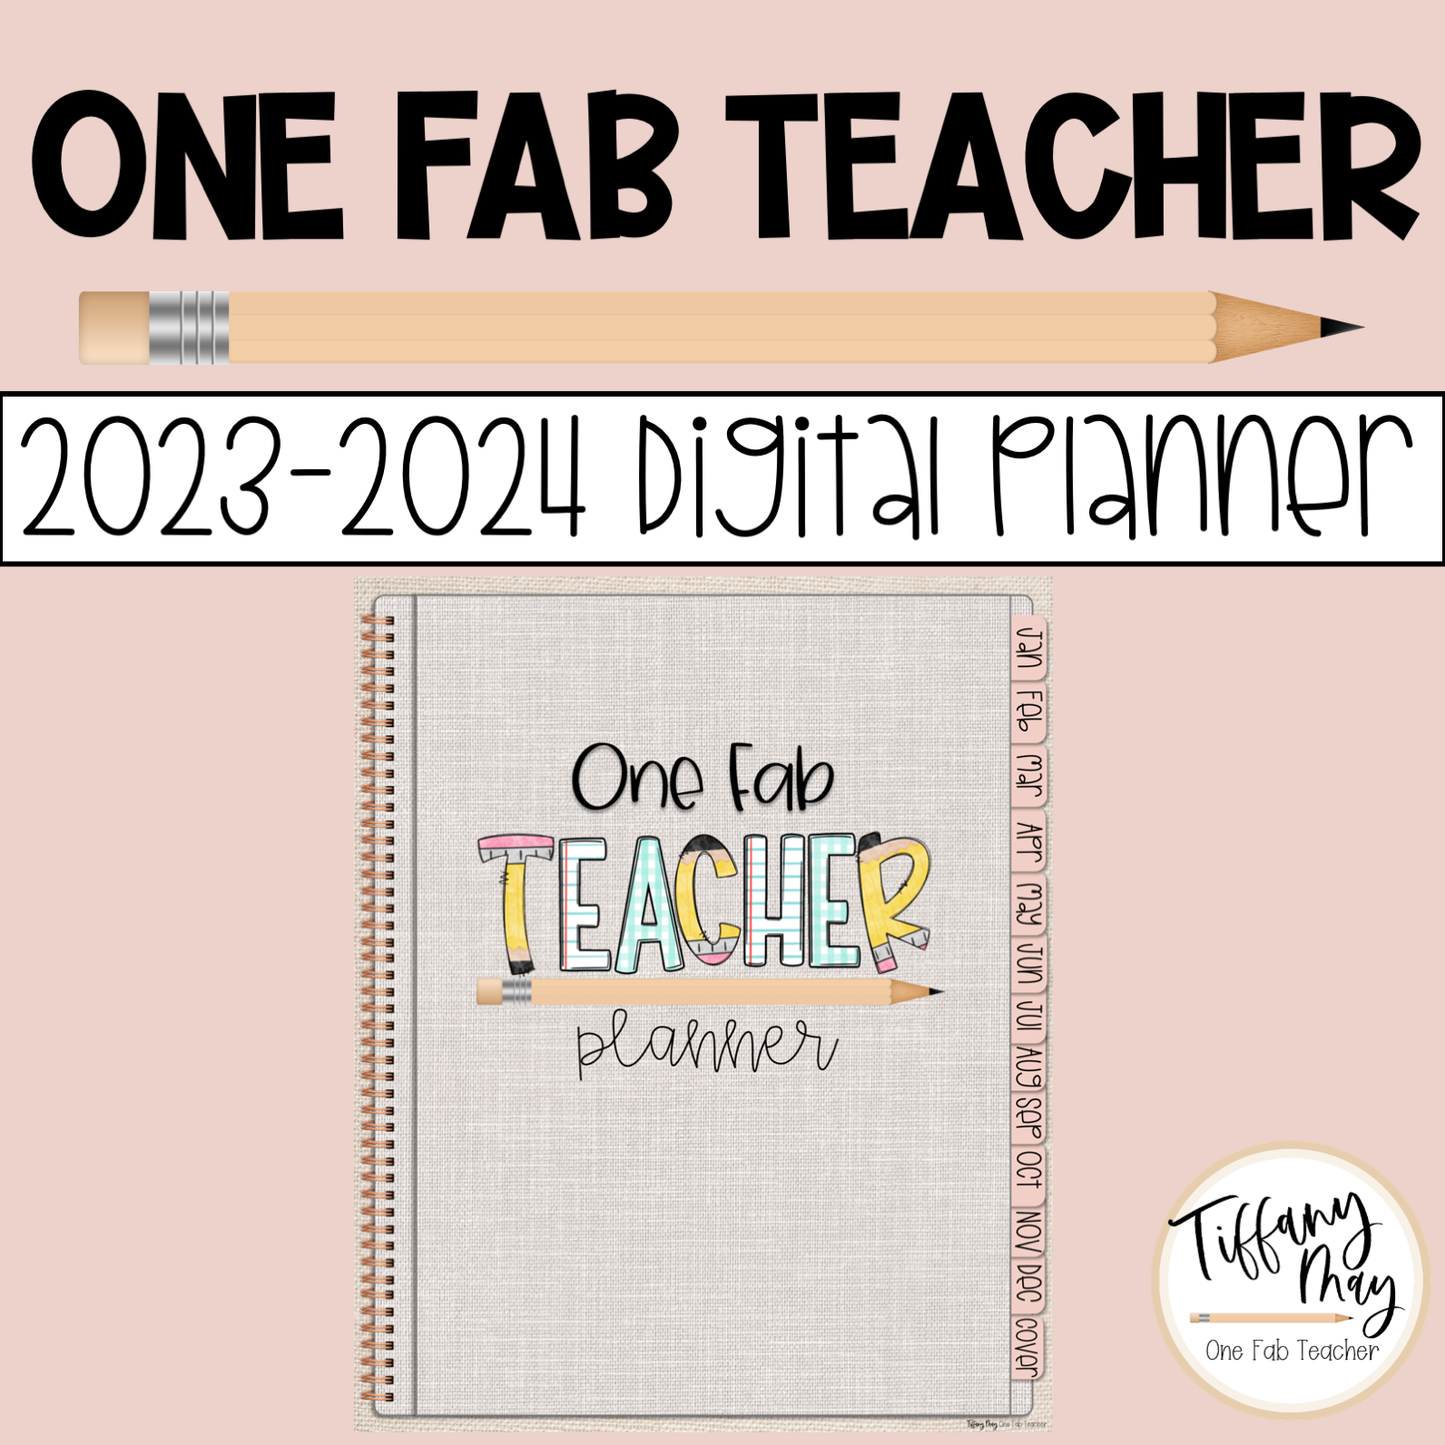 One Fab Teacher Digital Planner | Your Ultimate Planning Companion